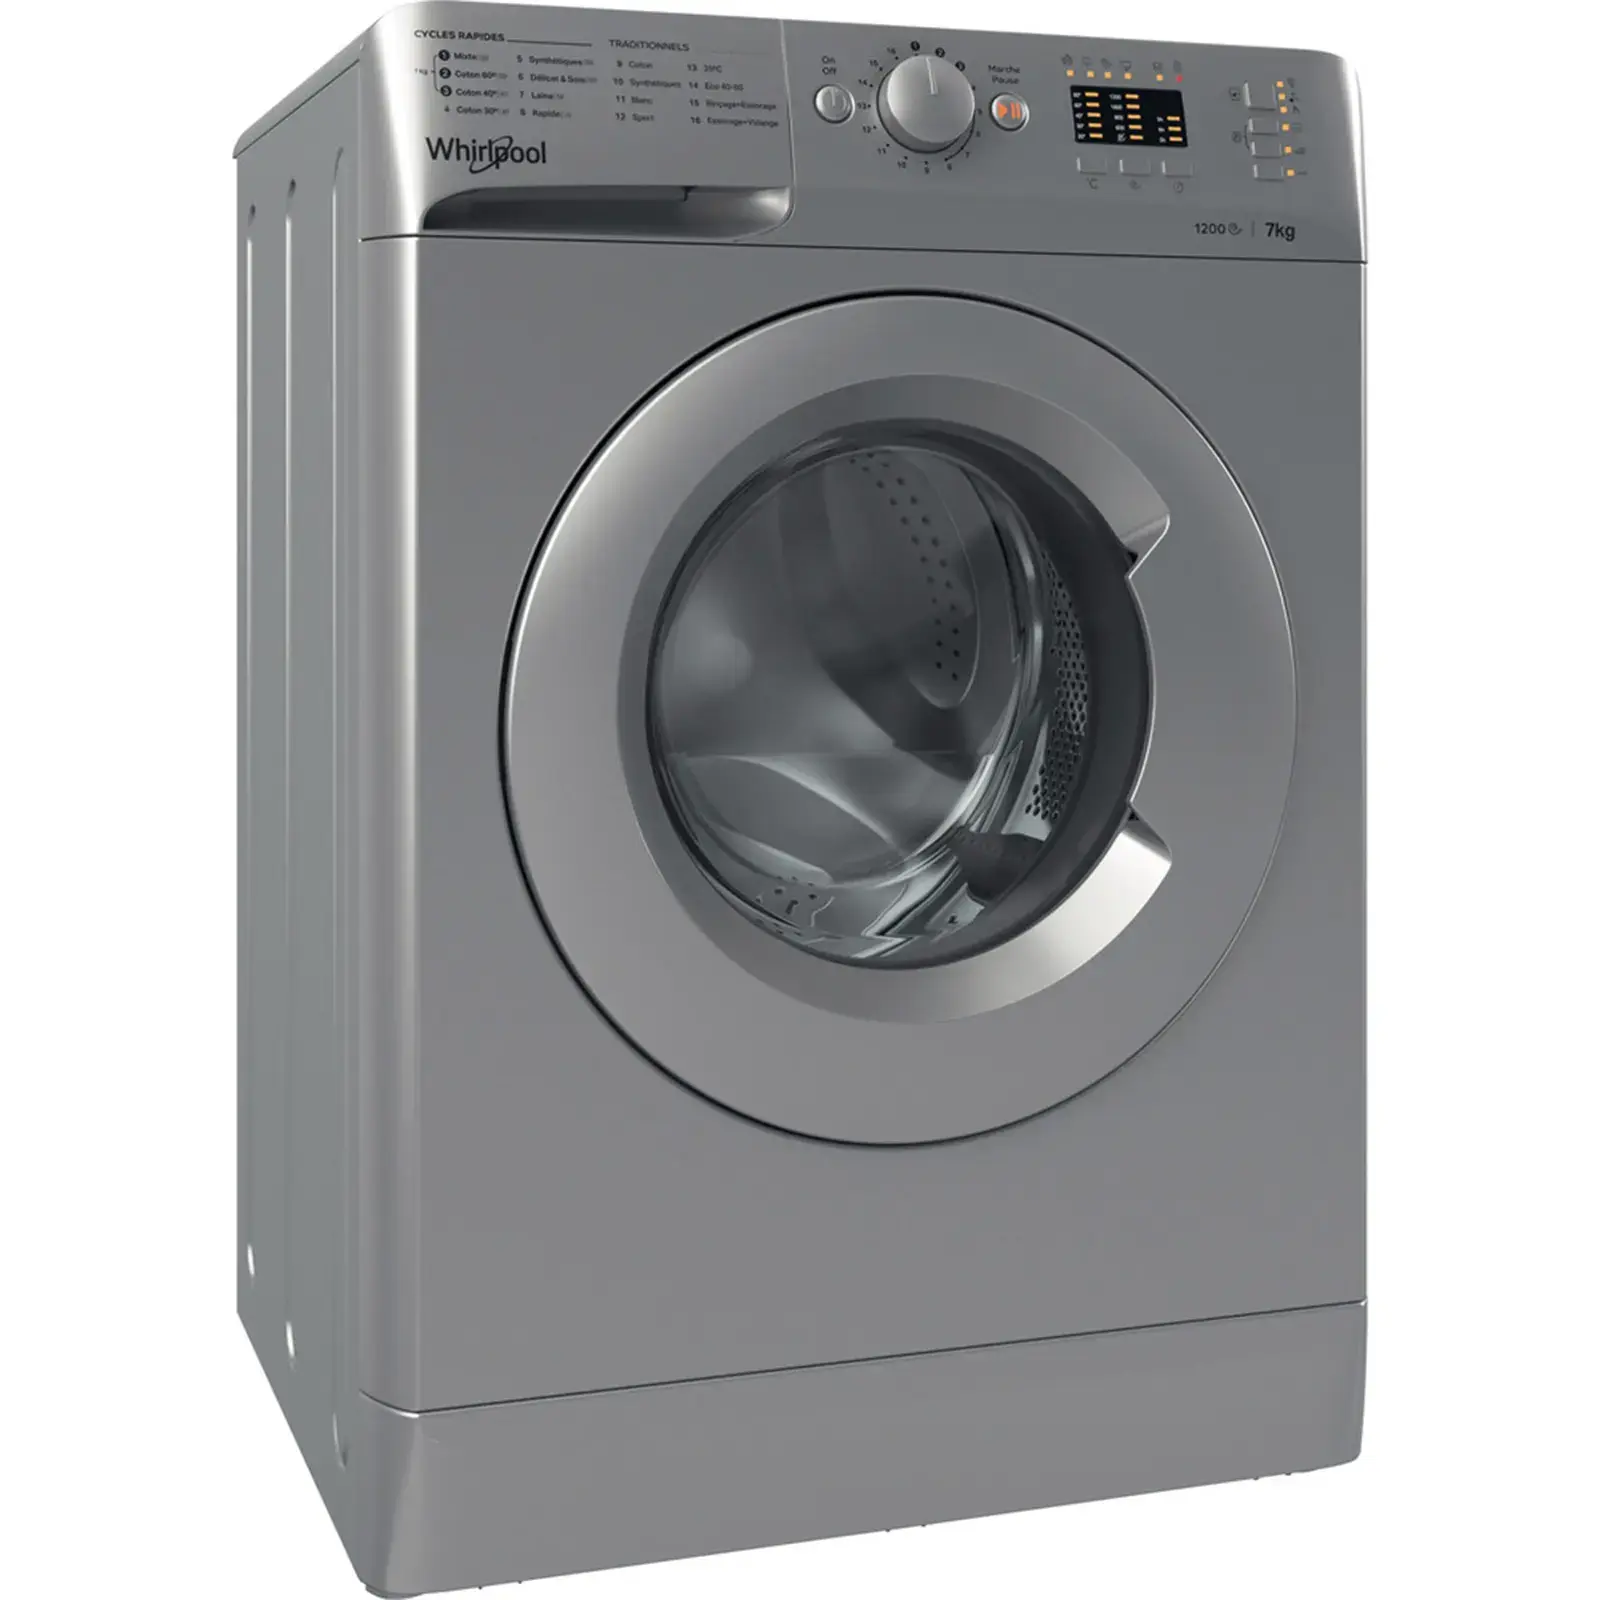 MACHINE A LAVER WHIRLPOOL FRONTALE 7 KG 1200T SILVER